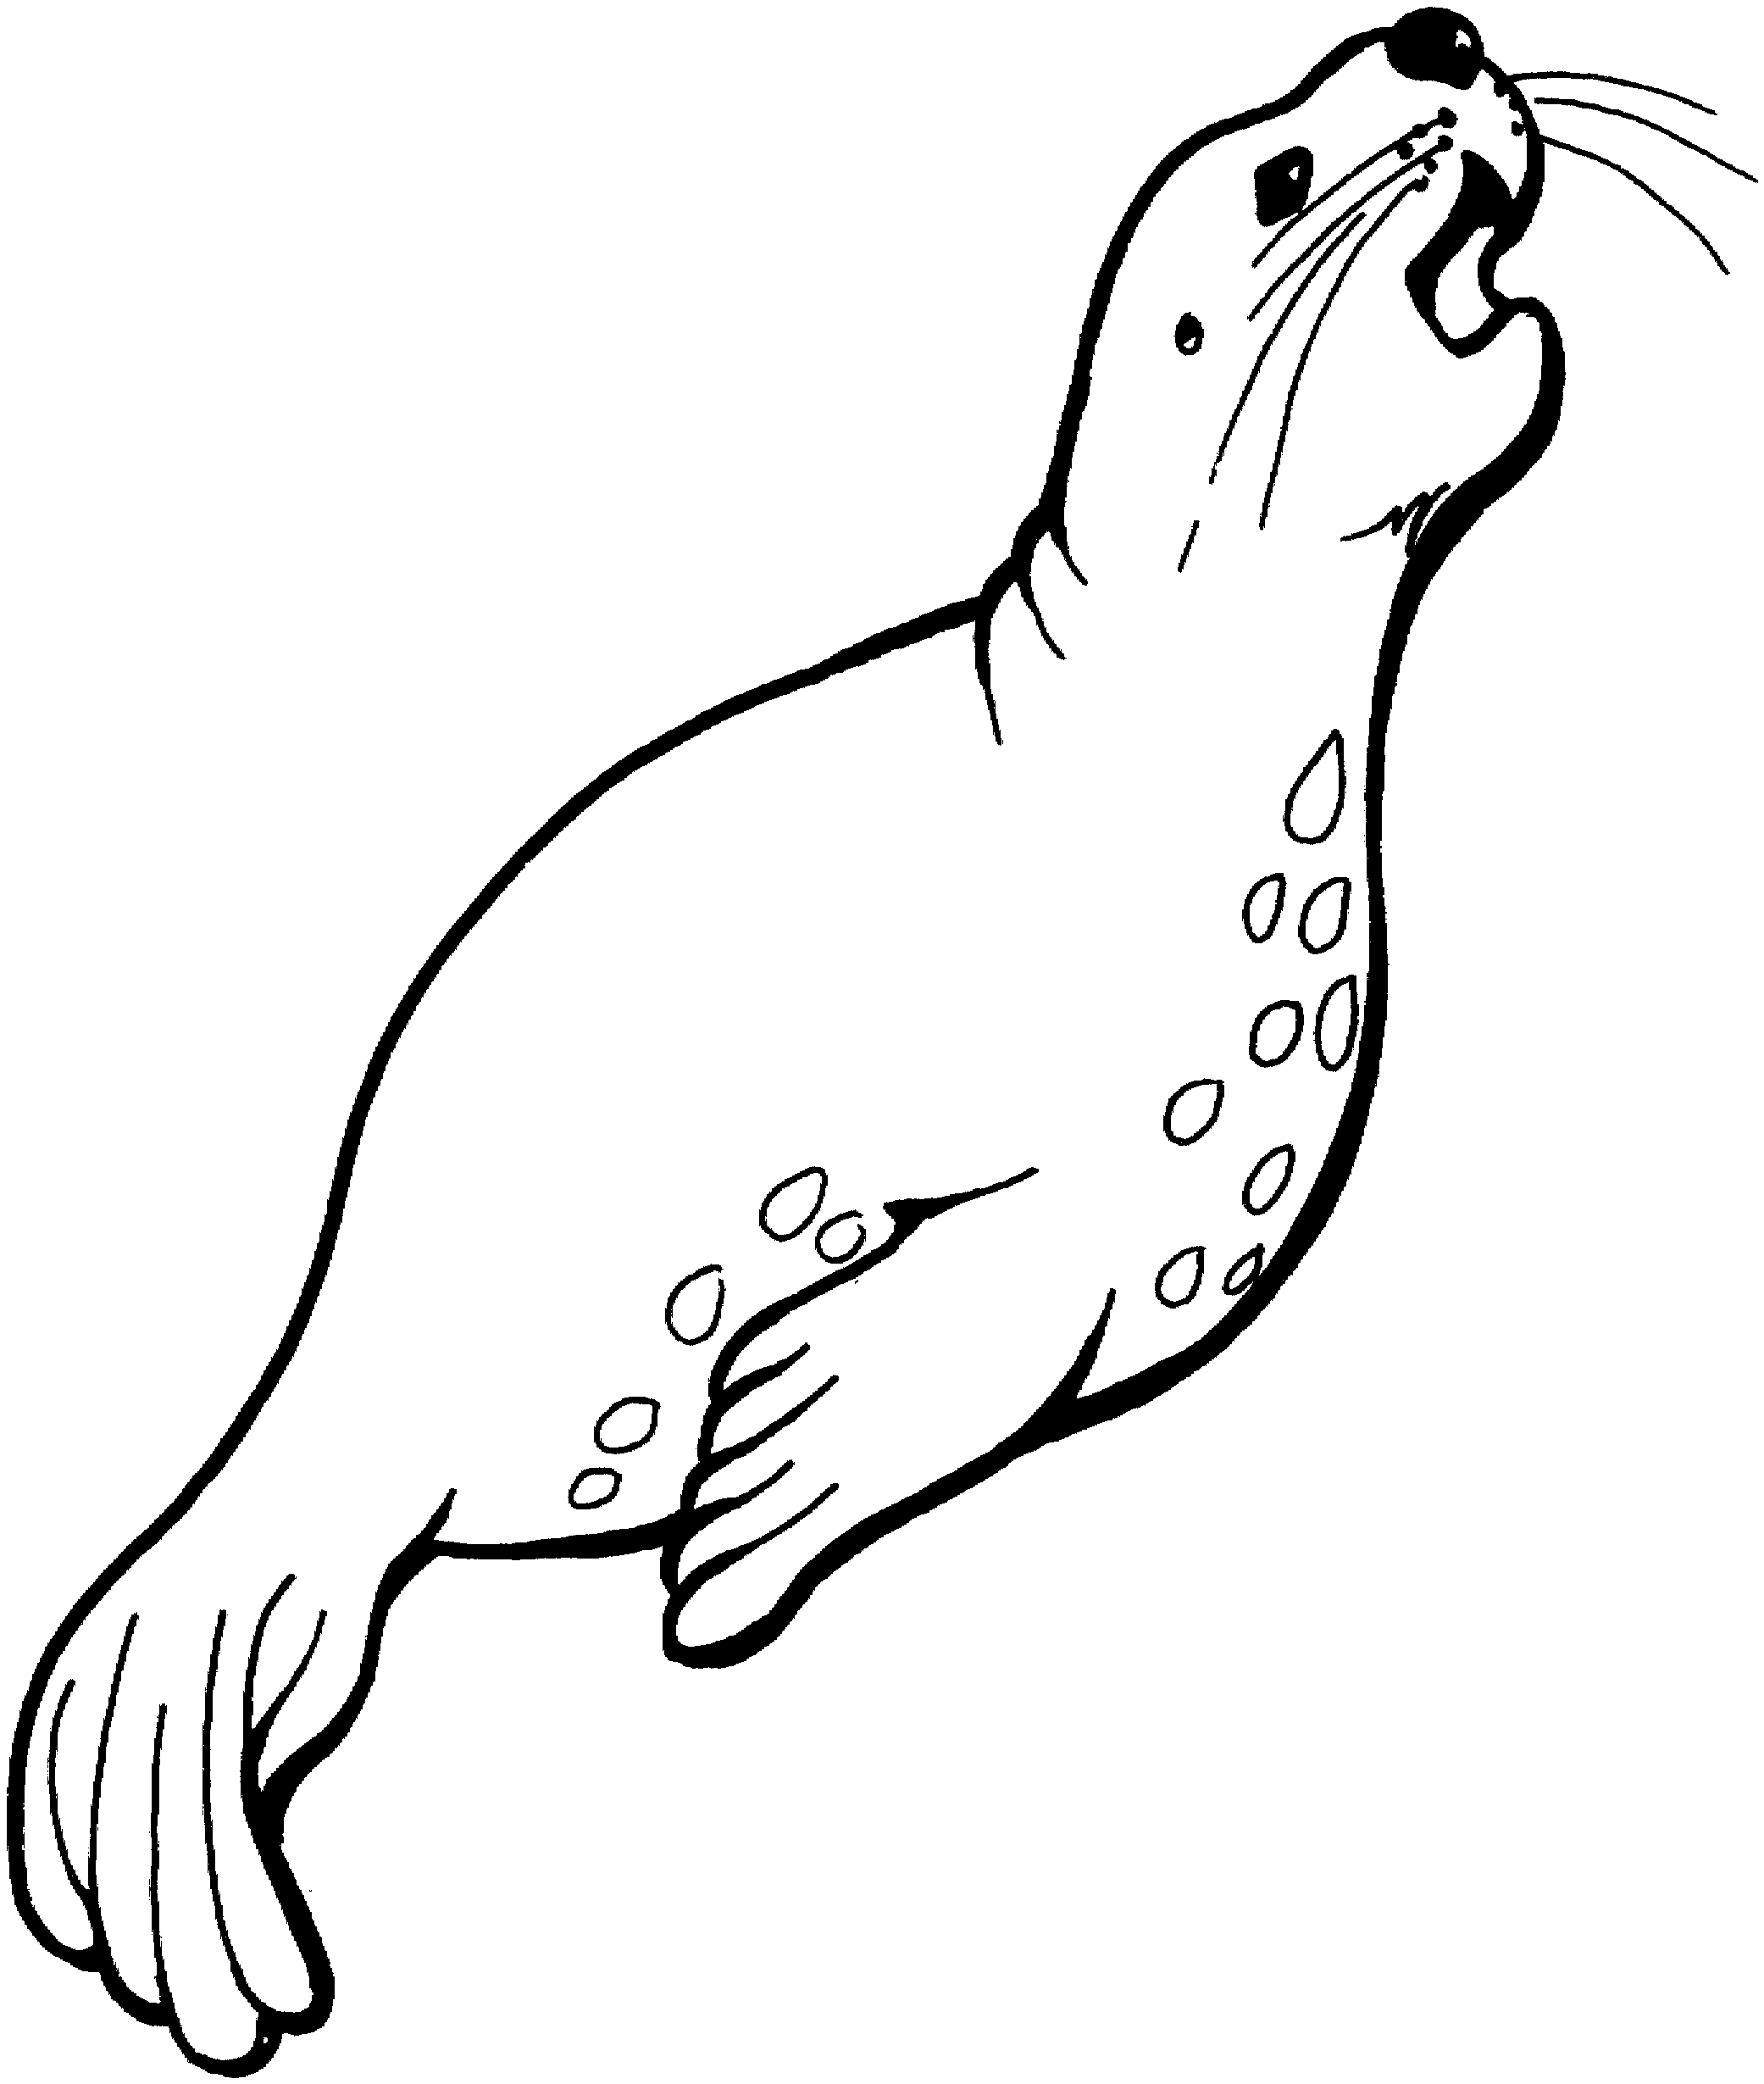 Seal clipart weddell seal. Free download clip art